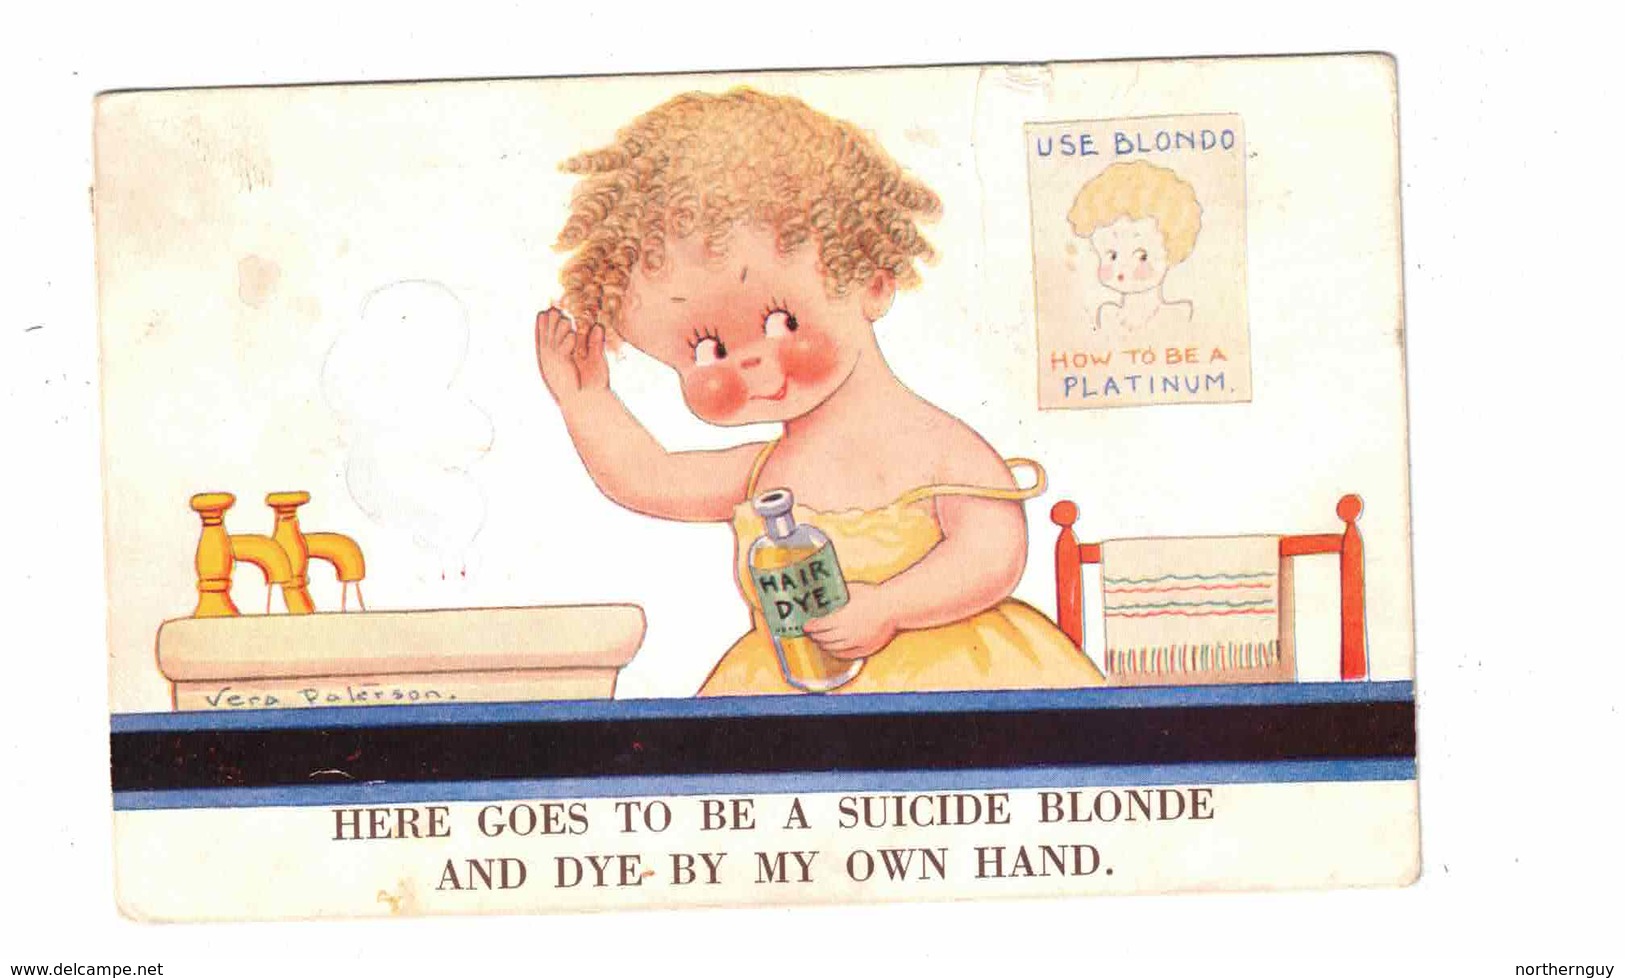 "...Suicide Blonde.." Baby Dyeing Here Own Hair Signed Artist "Vera Paterson" England, Old Card Sent In 1941 From Canada - Paterson